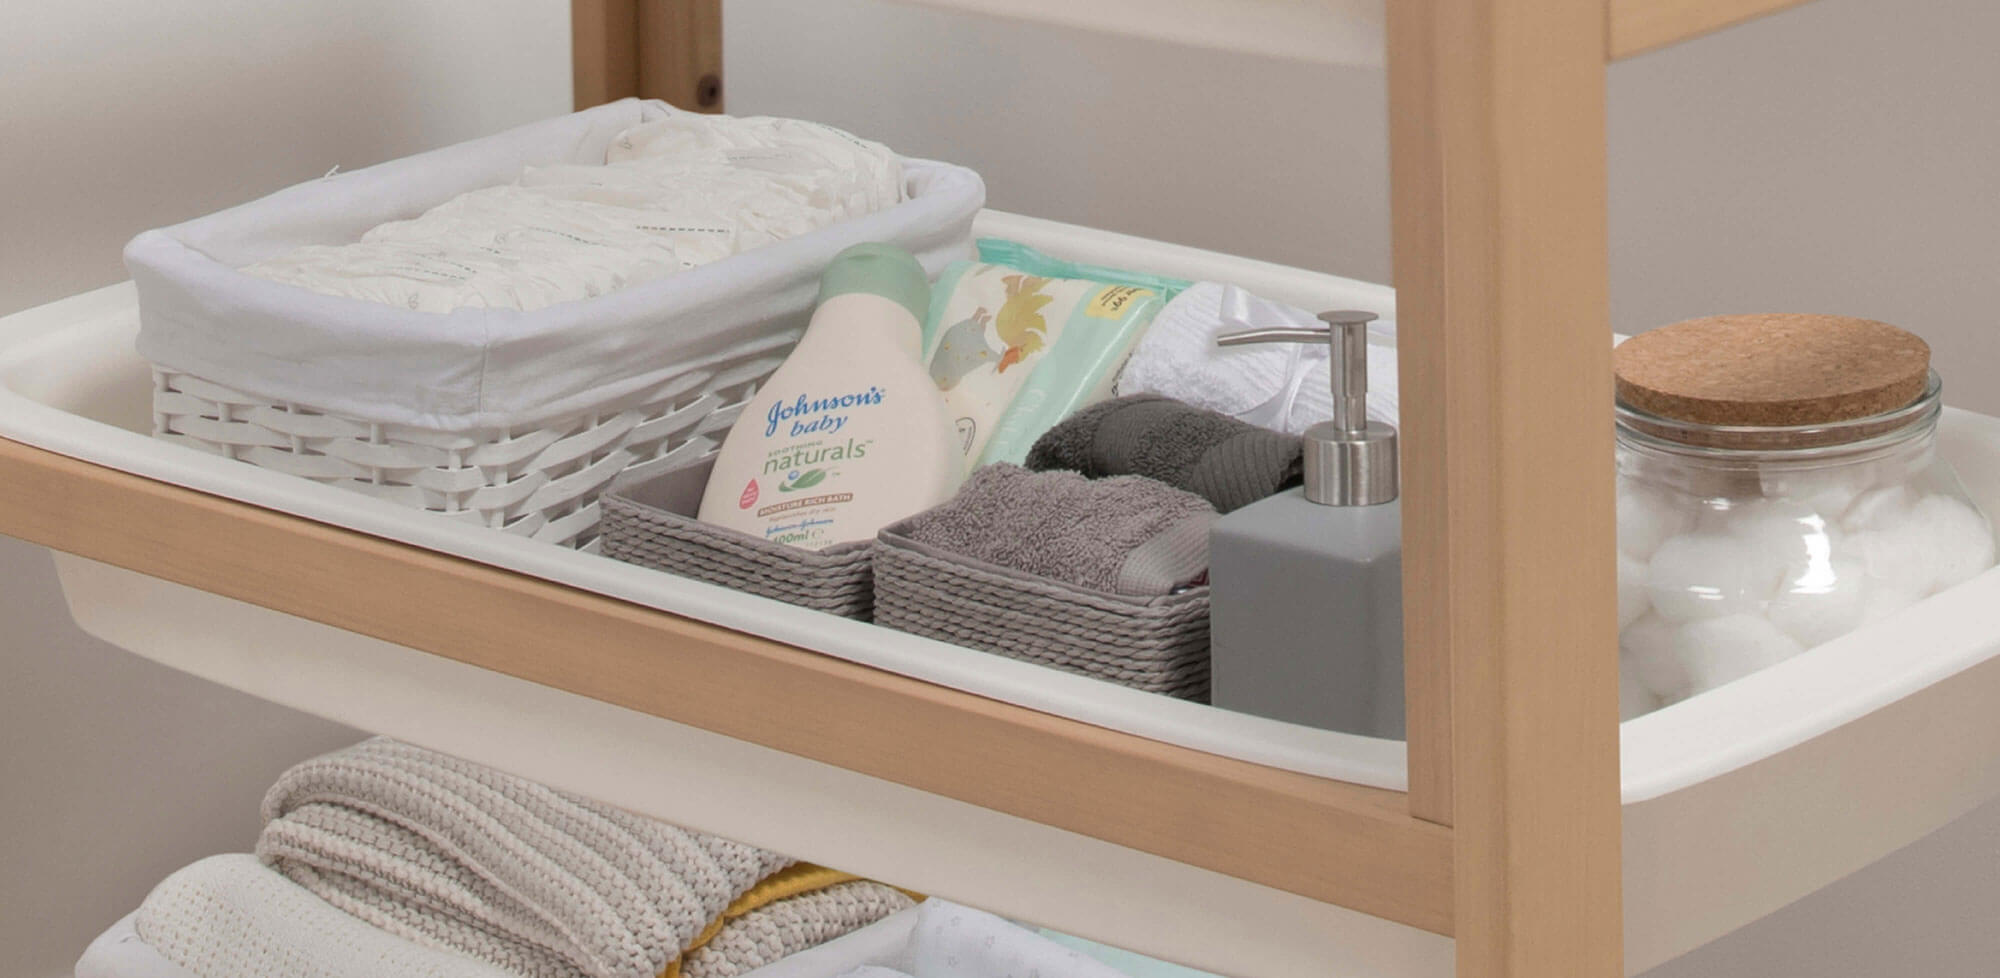 Baby changing items on a shelf